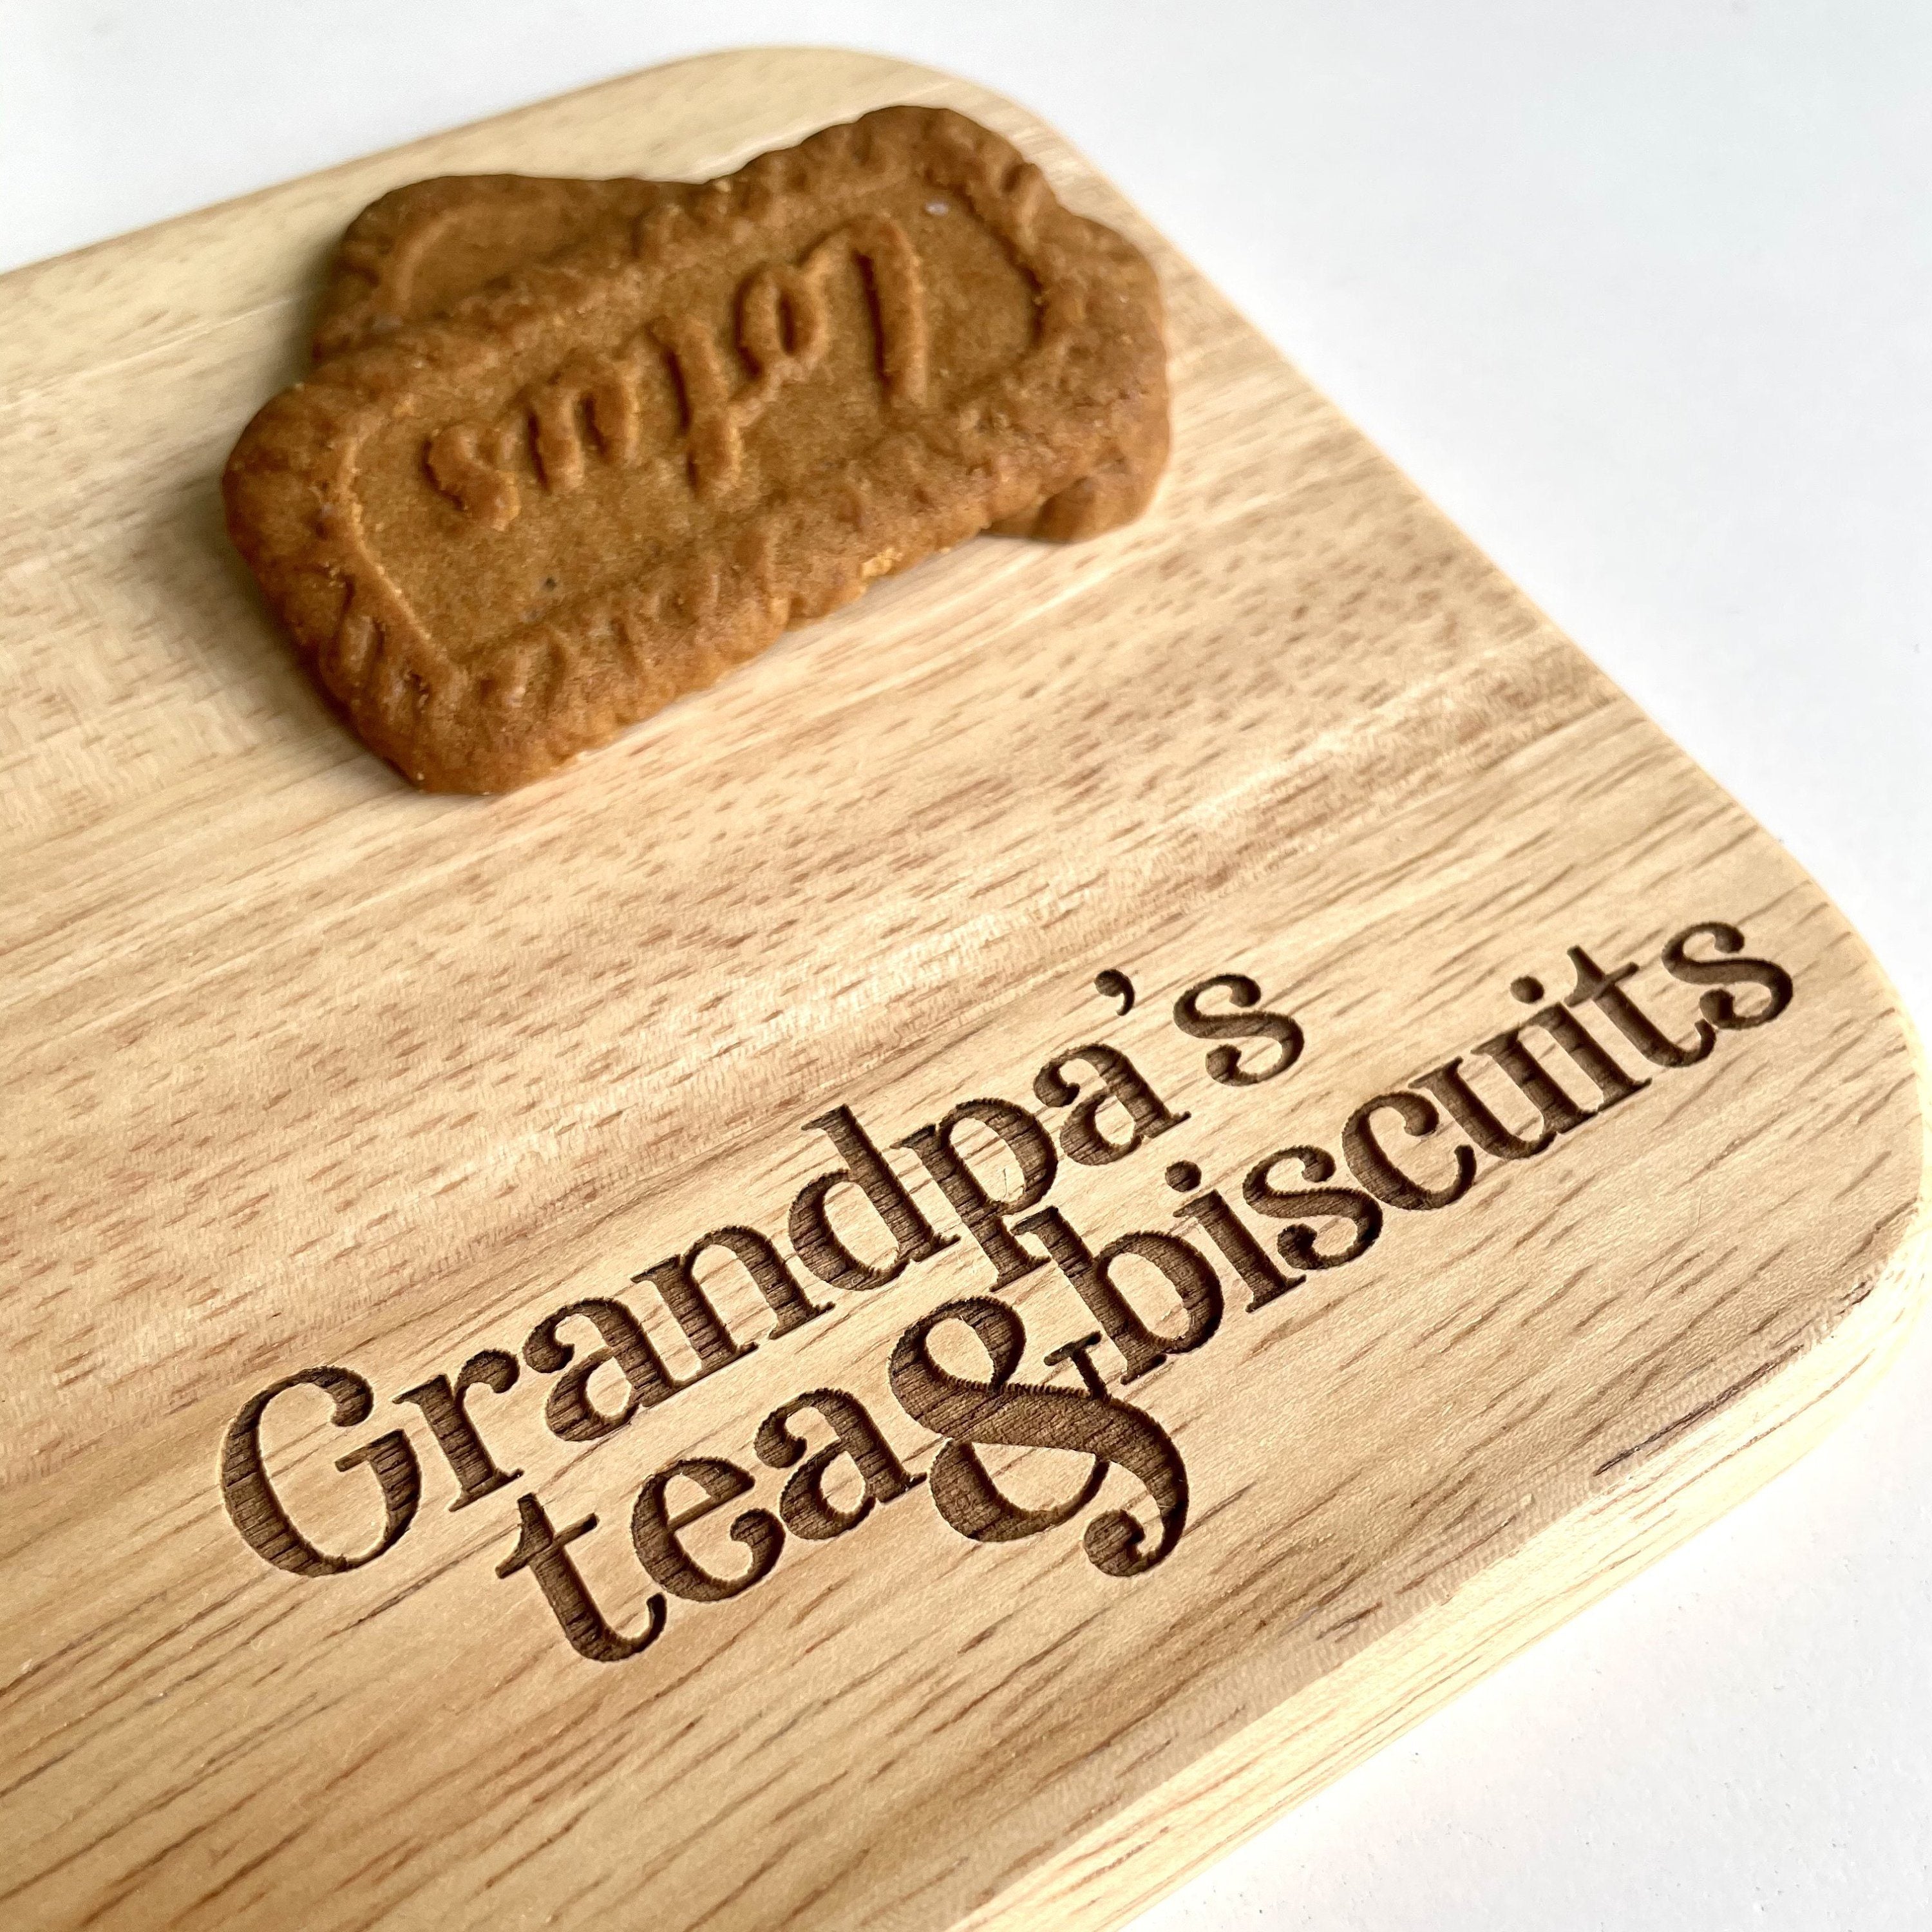 Grandpa's tea and biscuits engraved board,Personalised coffee board,Gift for birthday, new home